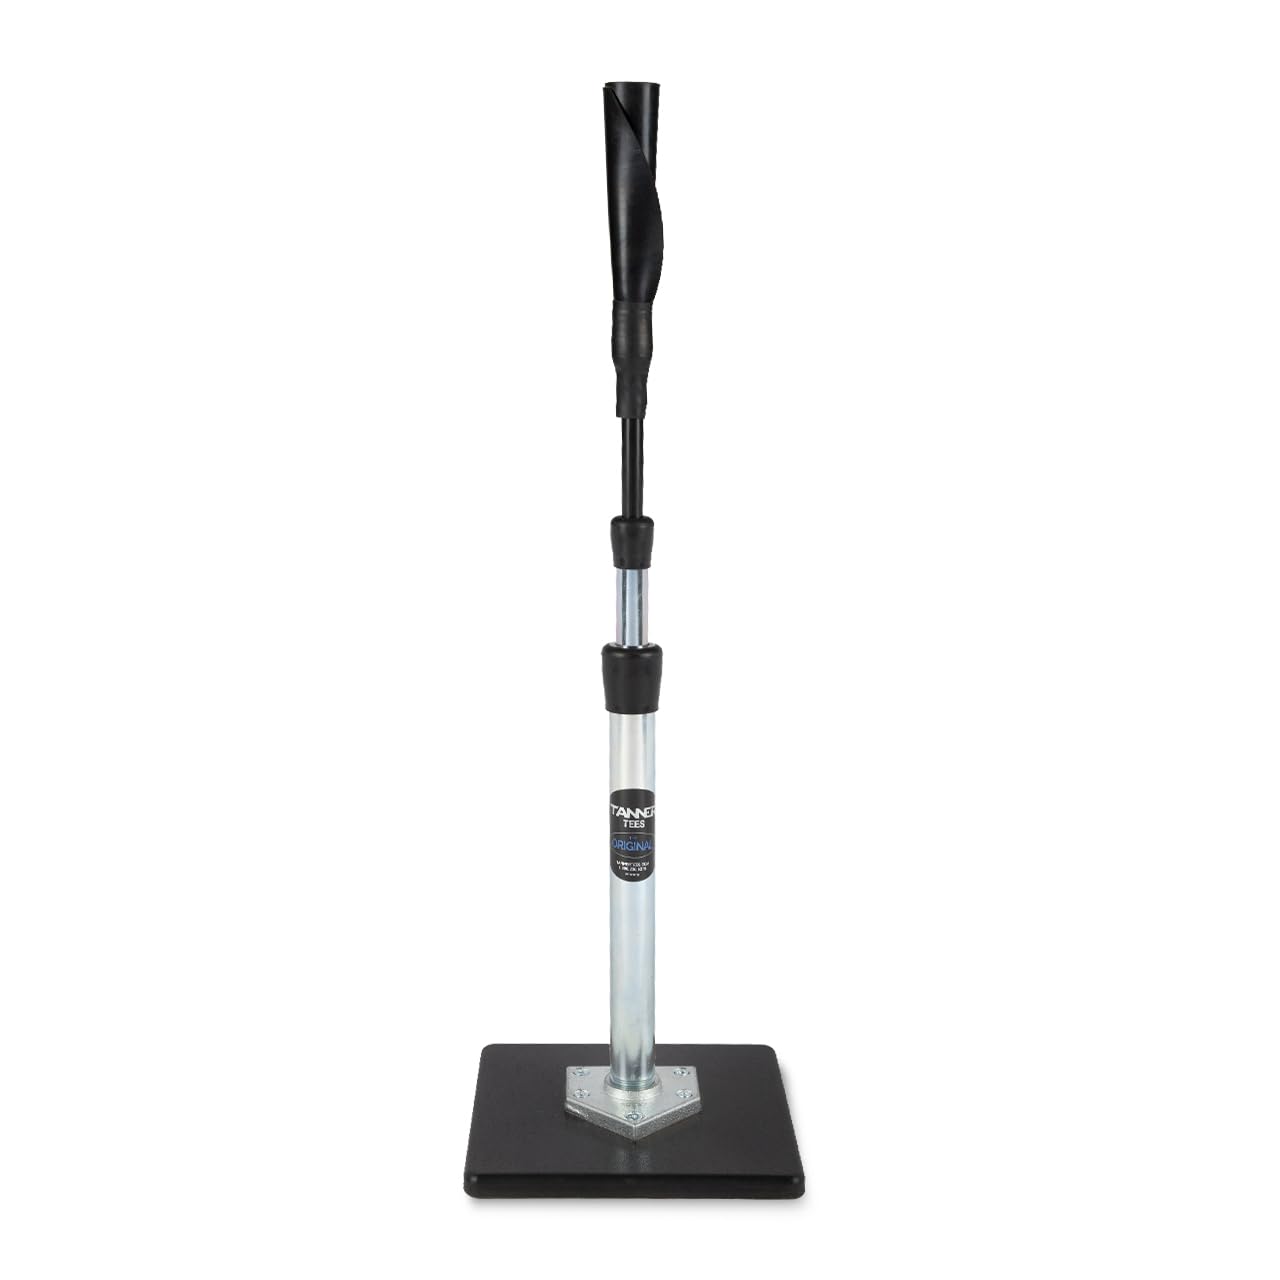 Tanner TEE The Original Premium Pro-Style Baseball/Softball Batting Tee with Tanner Original Base, Patented Hand-Rolled Flextop, Adjustable Height: 26 to 43 inches